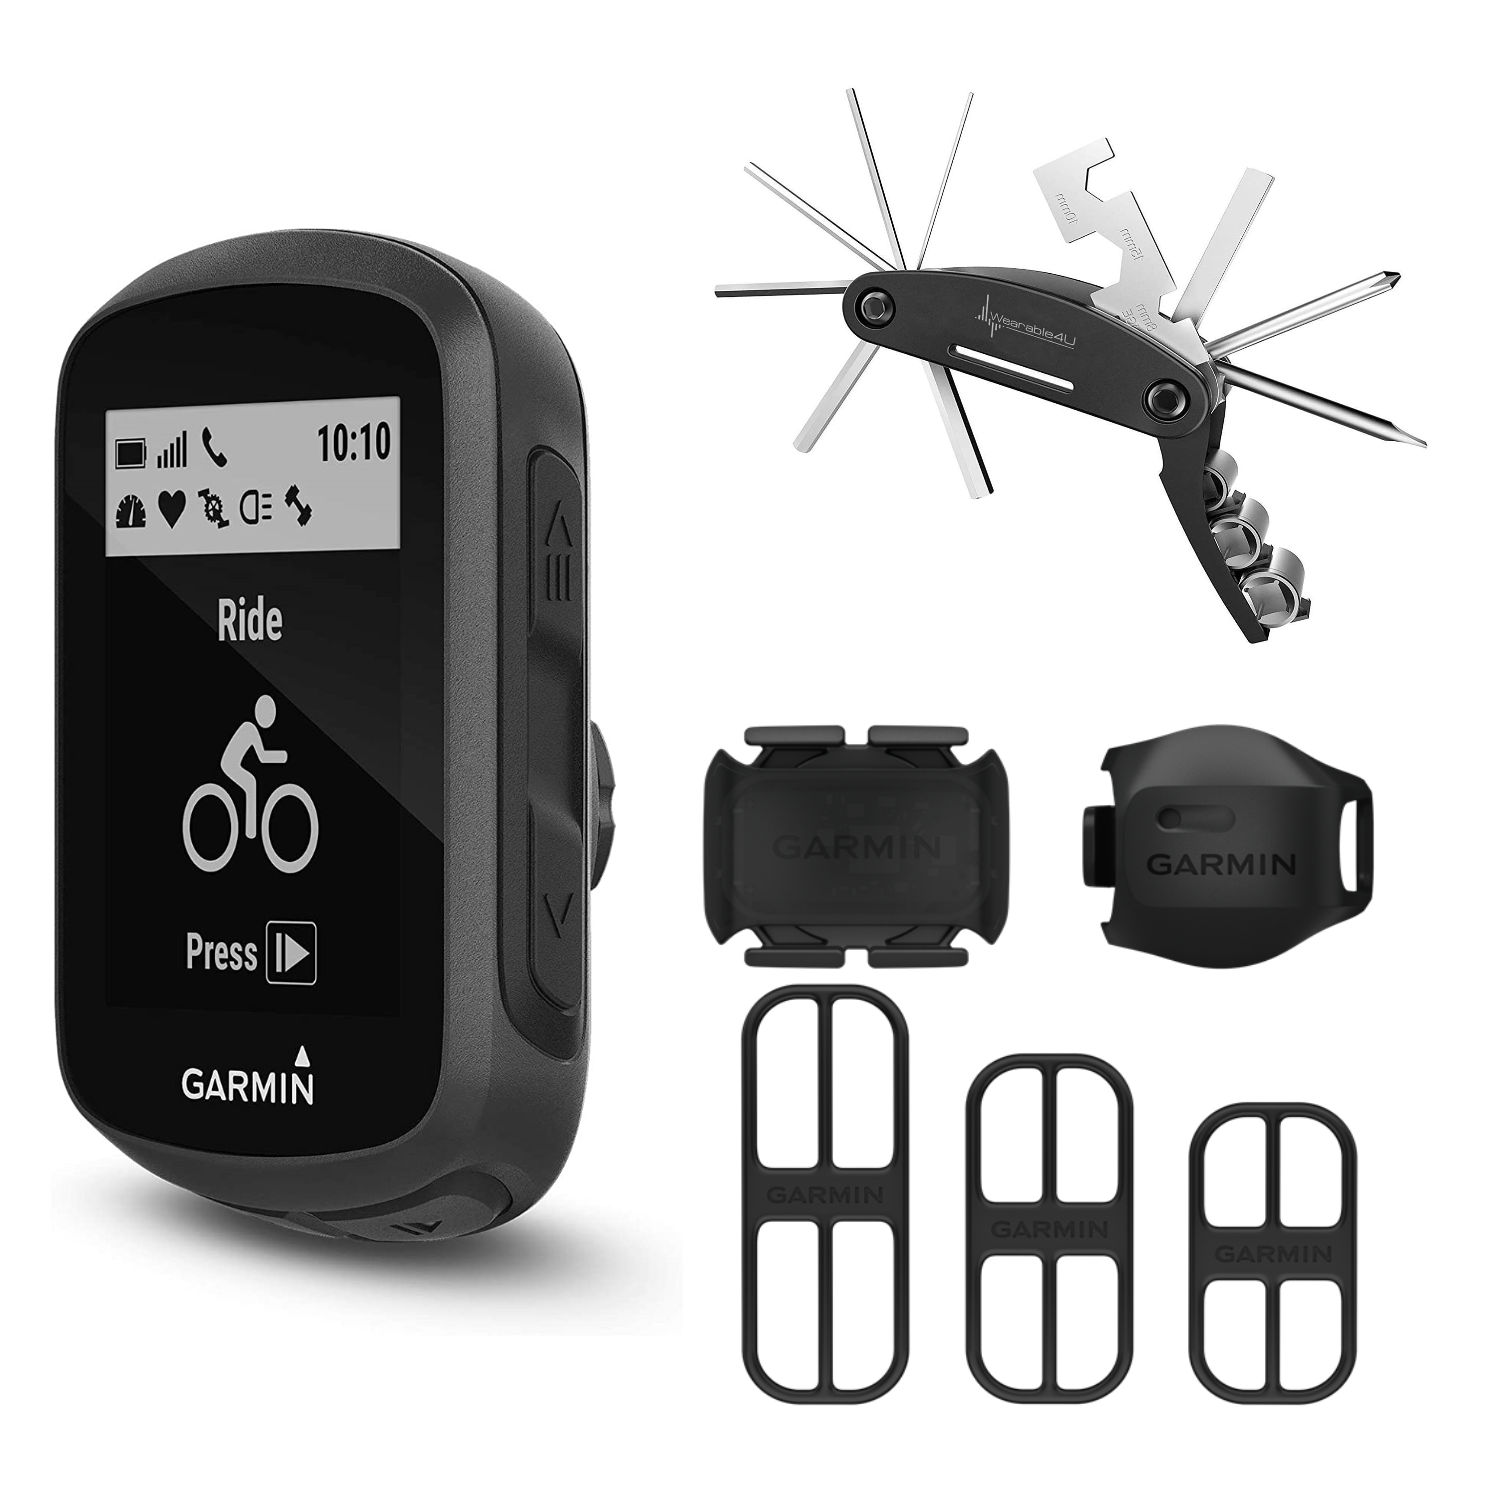 130 Garmin Gadgets Bike Plus – Computer Garmin GPS and with included Sp Cycling Edge Sports